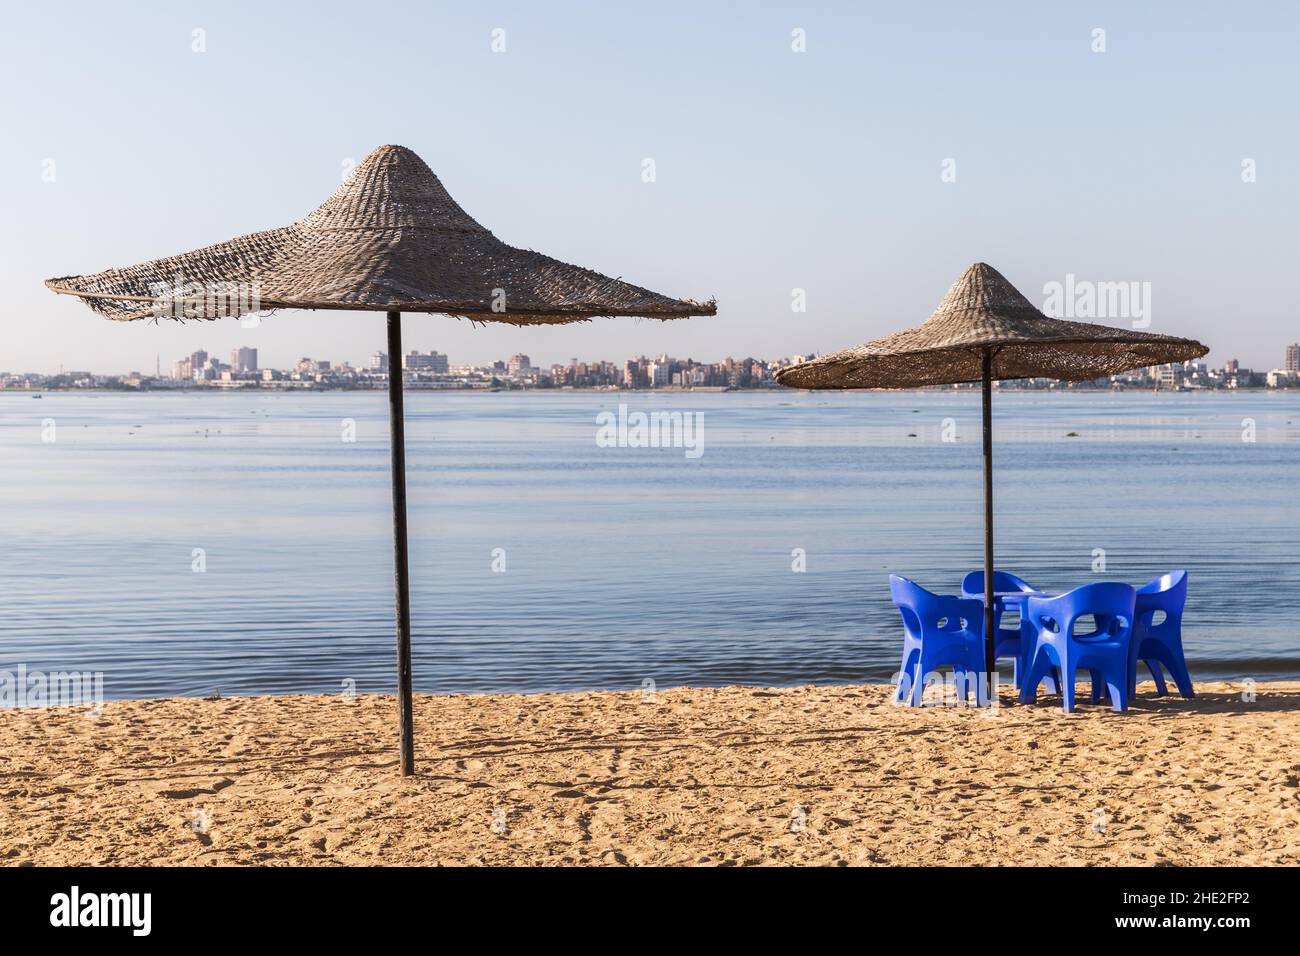 Straw umbrellas and blue plastic chairs are on the beach at Lake Timsah, one of the Bitter Lakes linked by the Suez Canal. Ismailia, Egypt Stock Photo